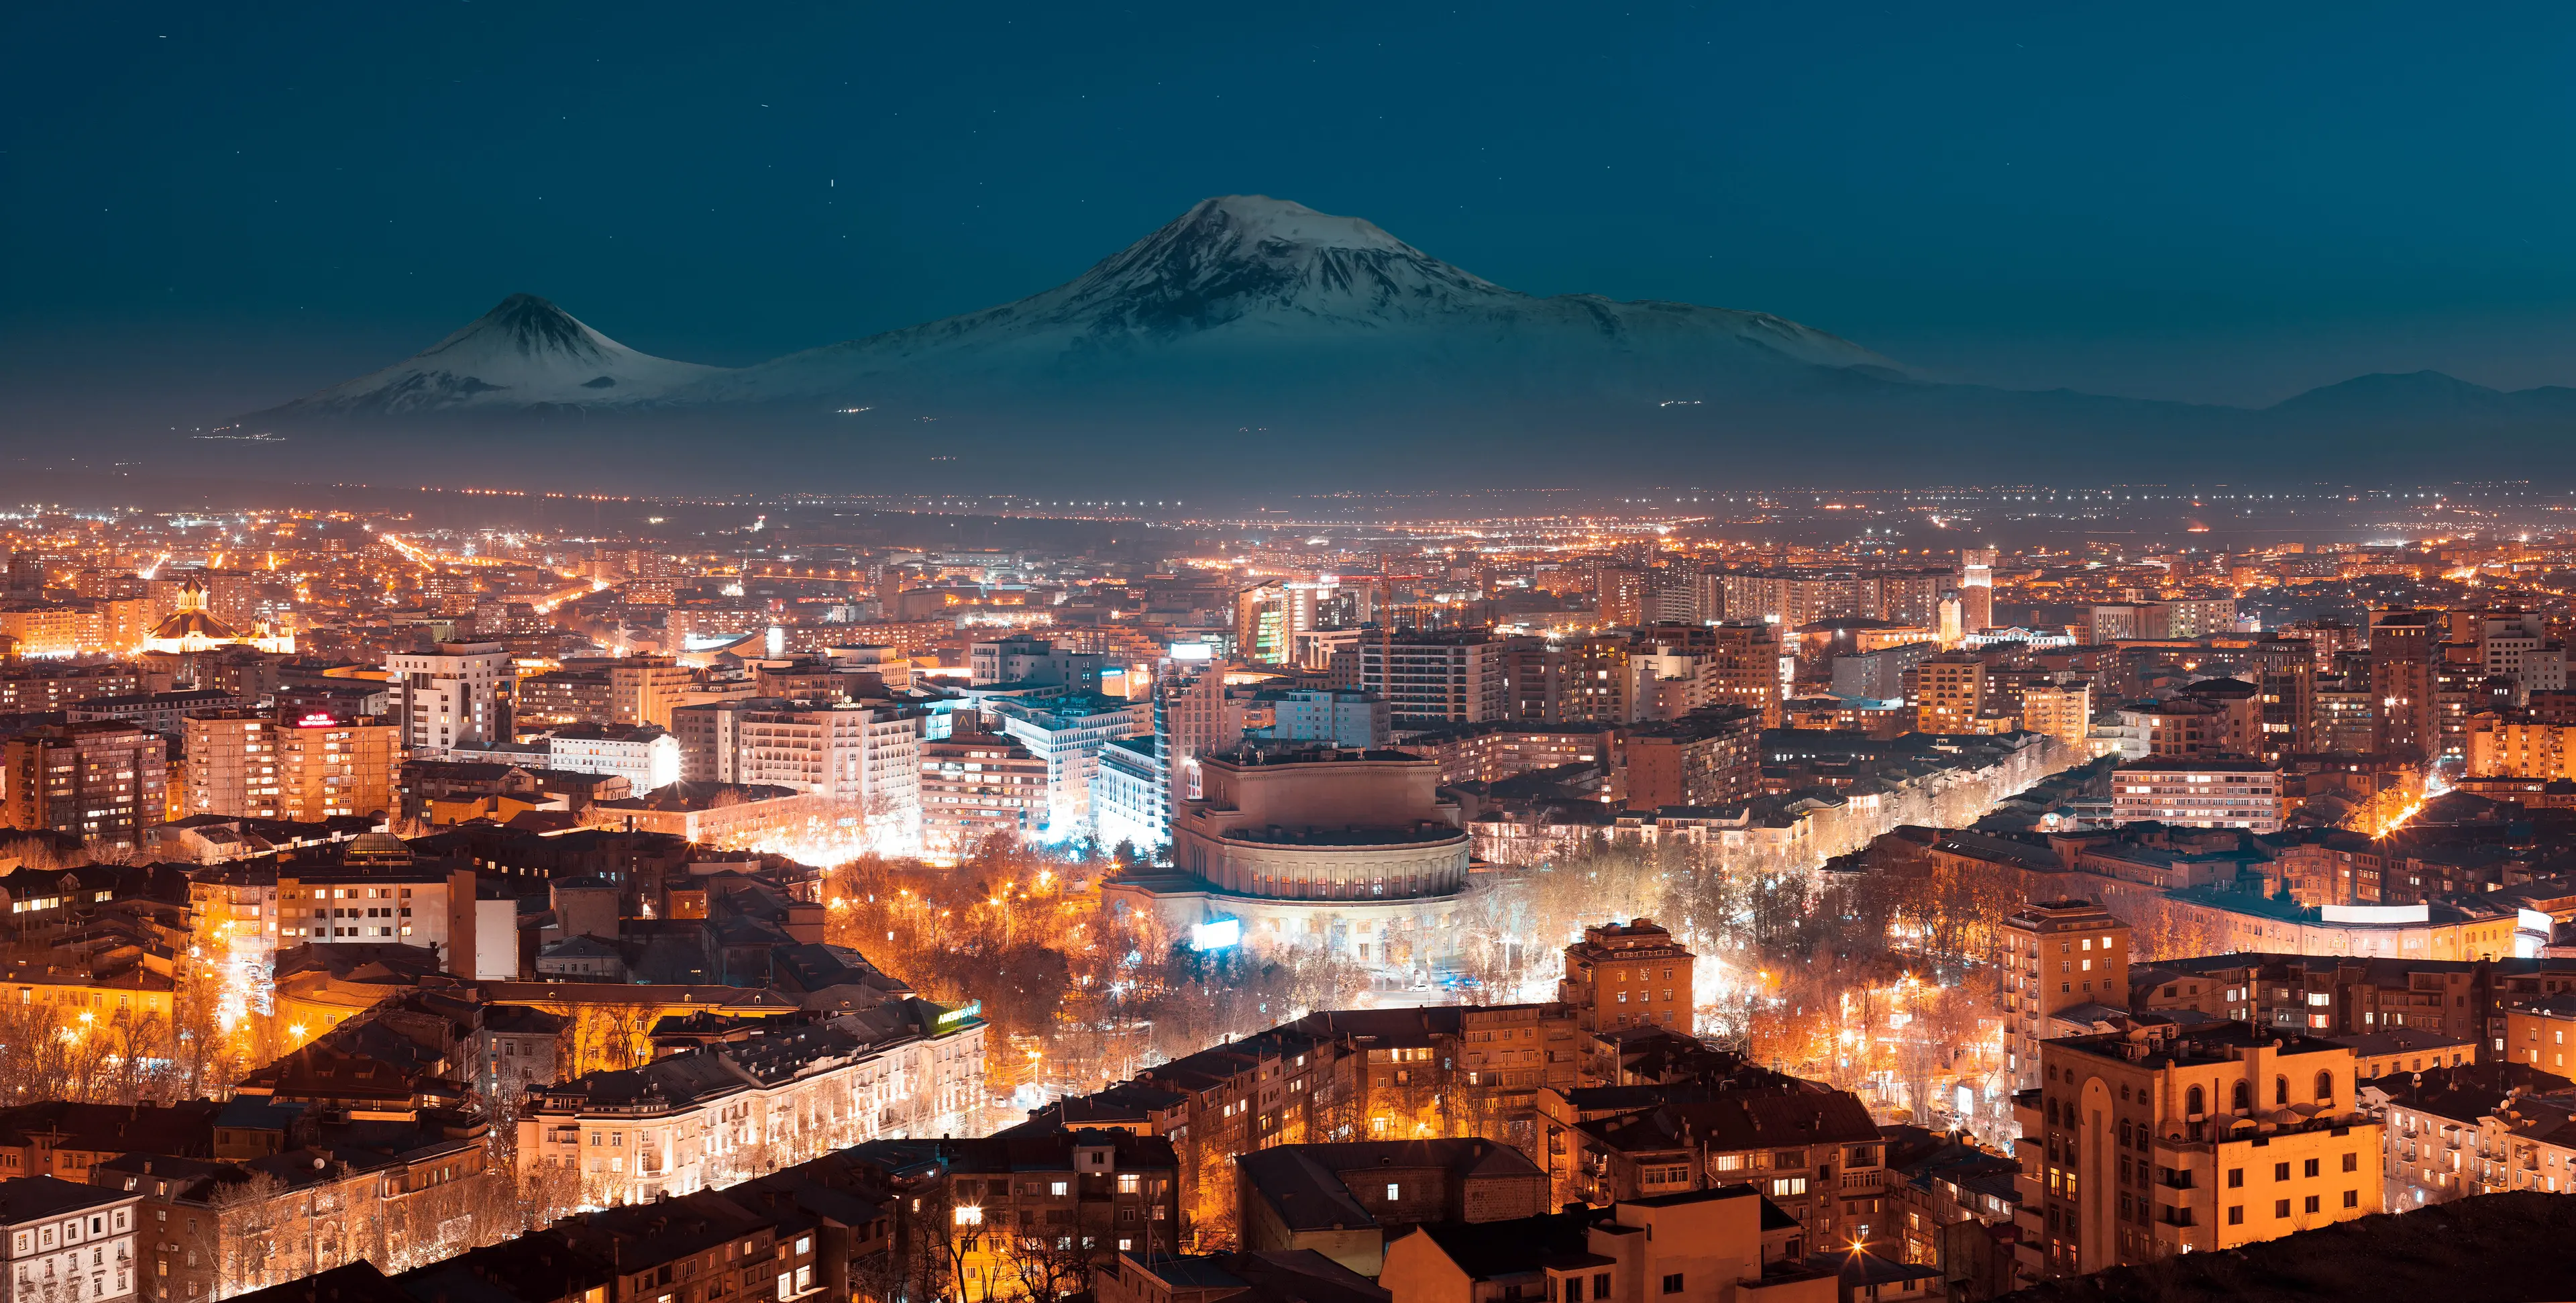 4-Day Yerevan Fun-Filled Trip: Nightlife and Shopping with Friends